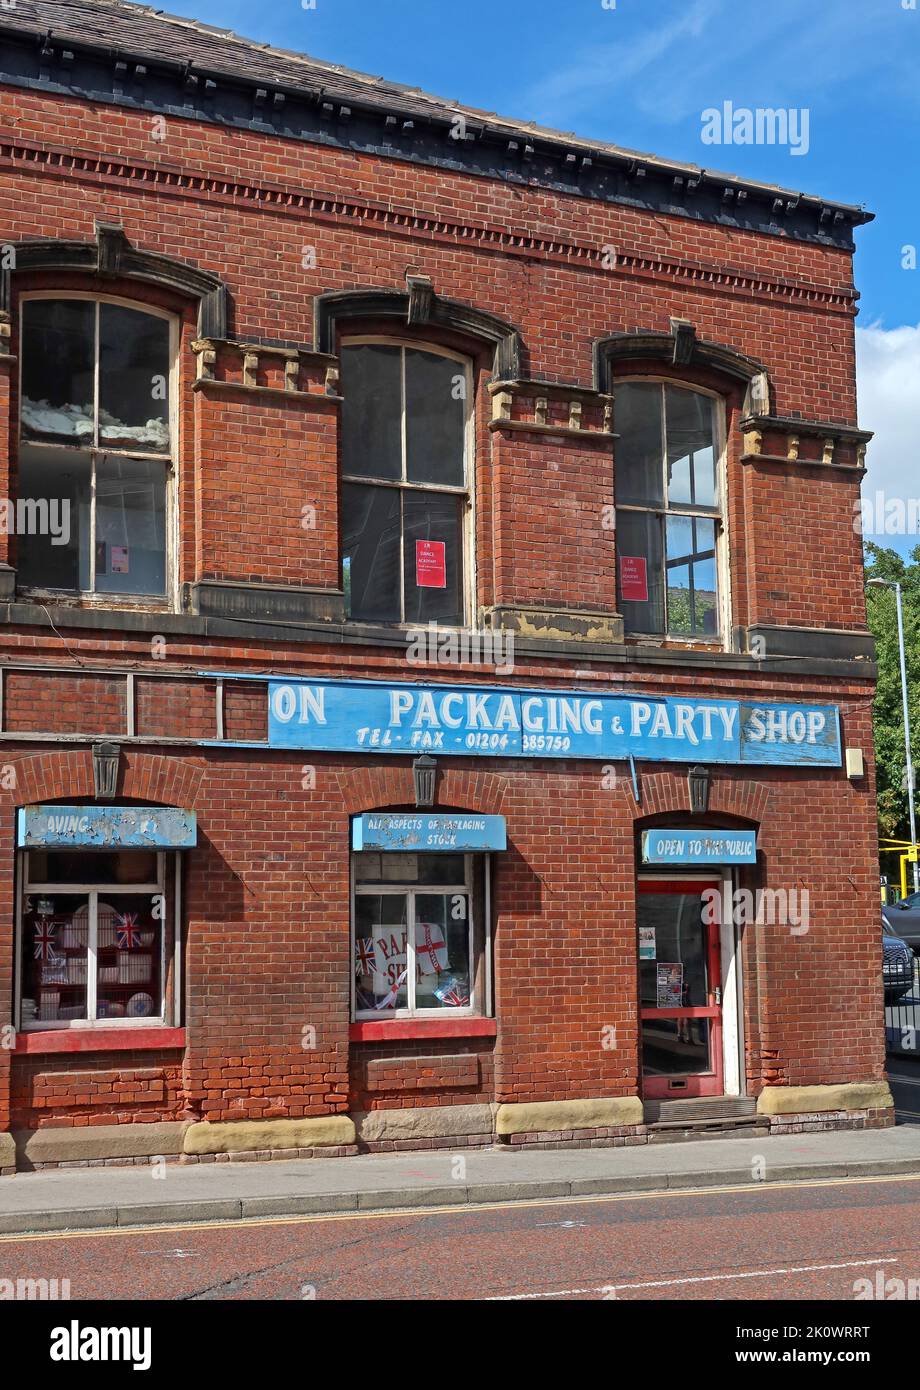 Victorian Warehouse, Haslam Moon Packaging & Party Shop, 15 Bow St, Bolton, Greater Manchester, Lancashire, England, UK, BL1 2EQ Stockfoto